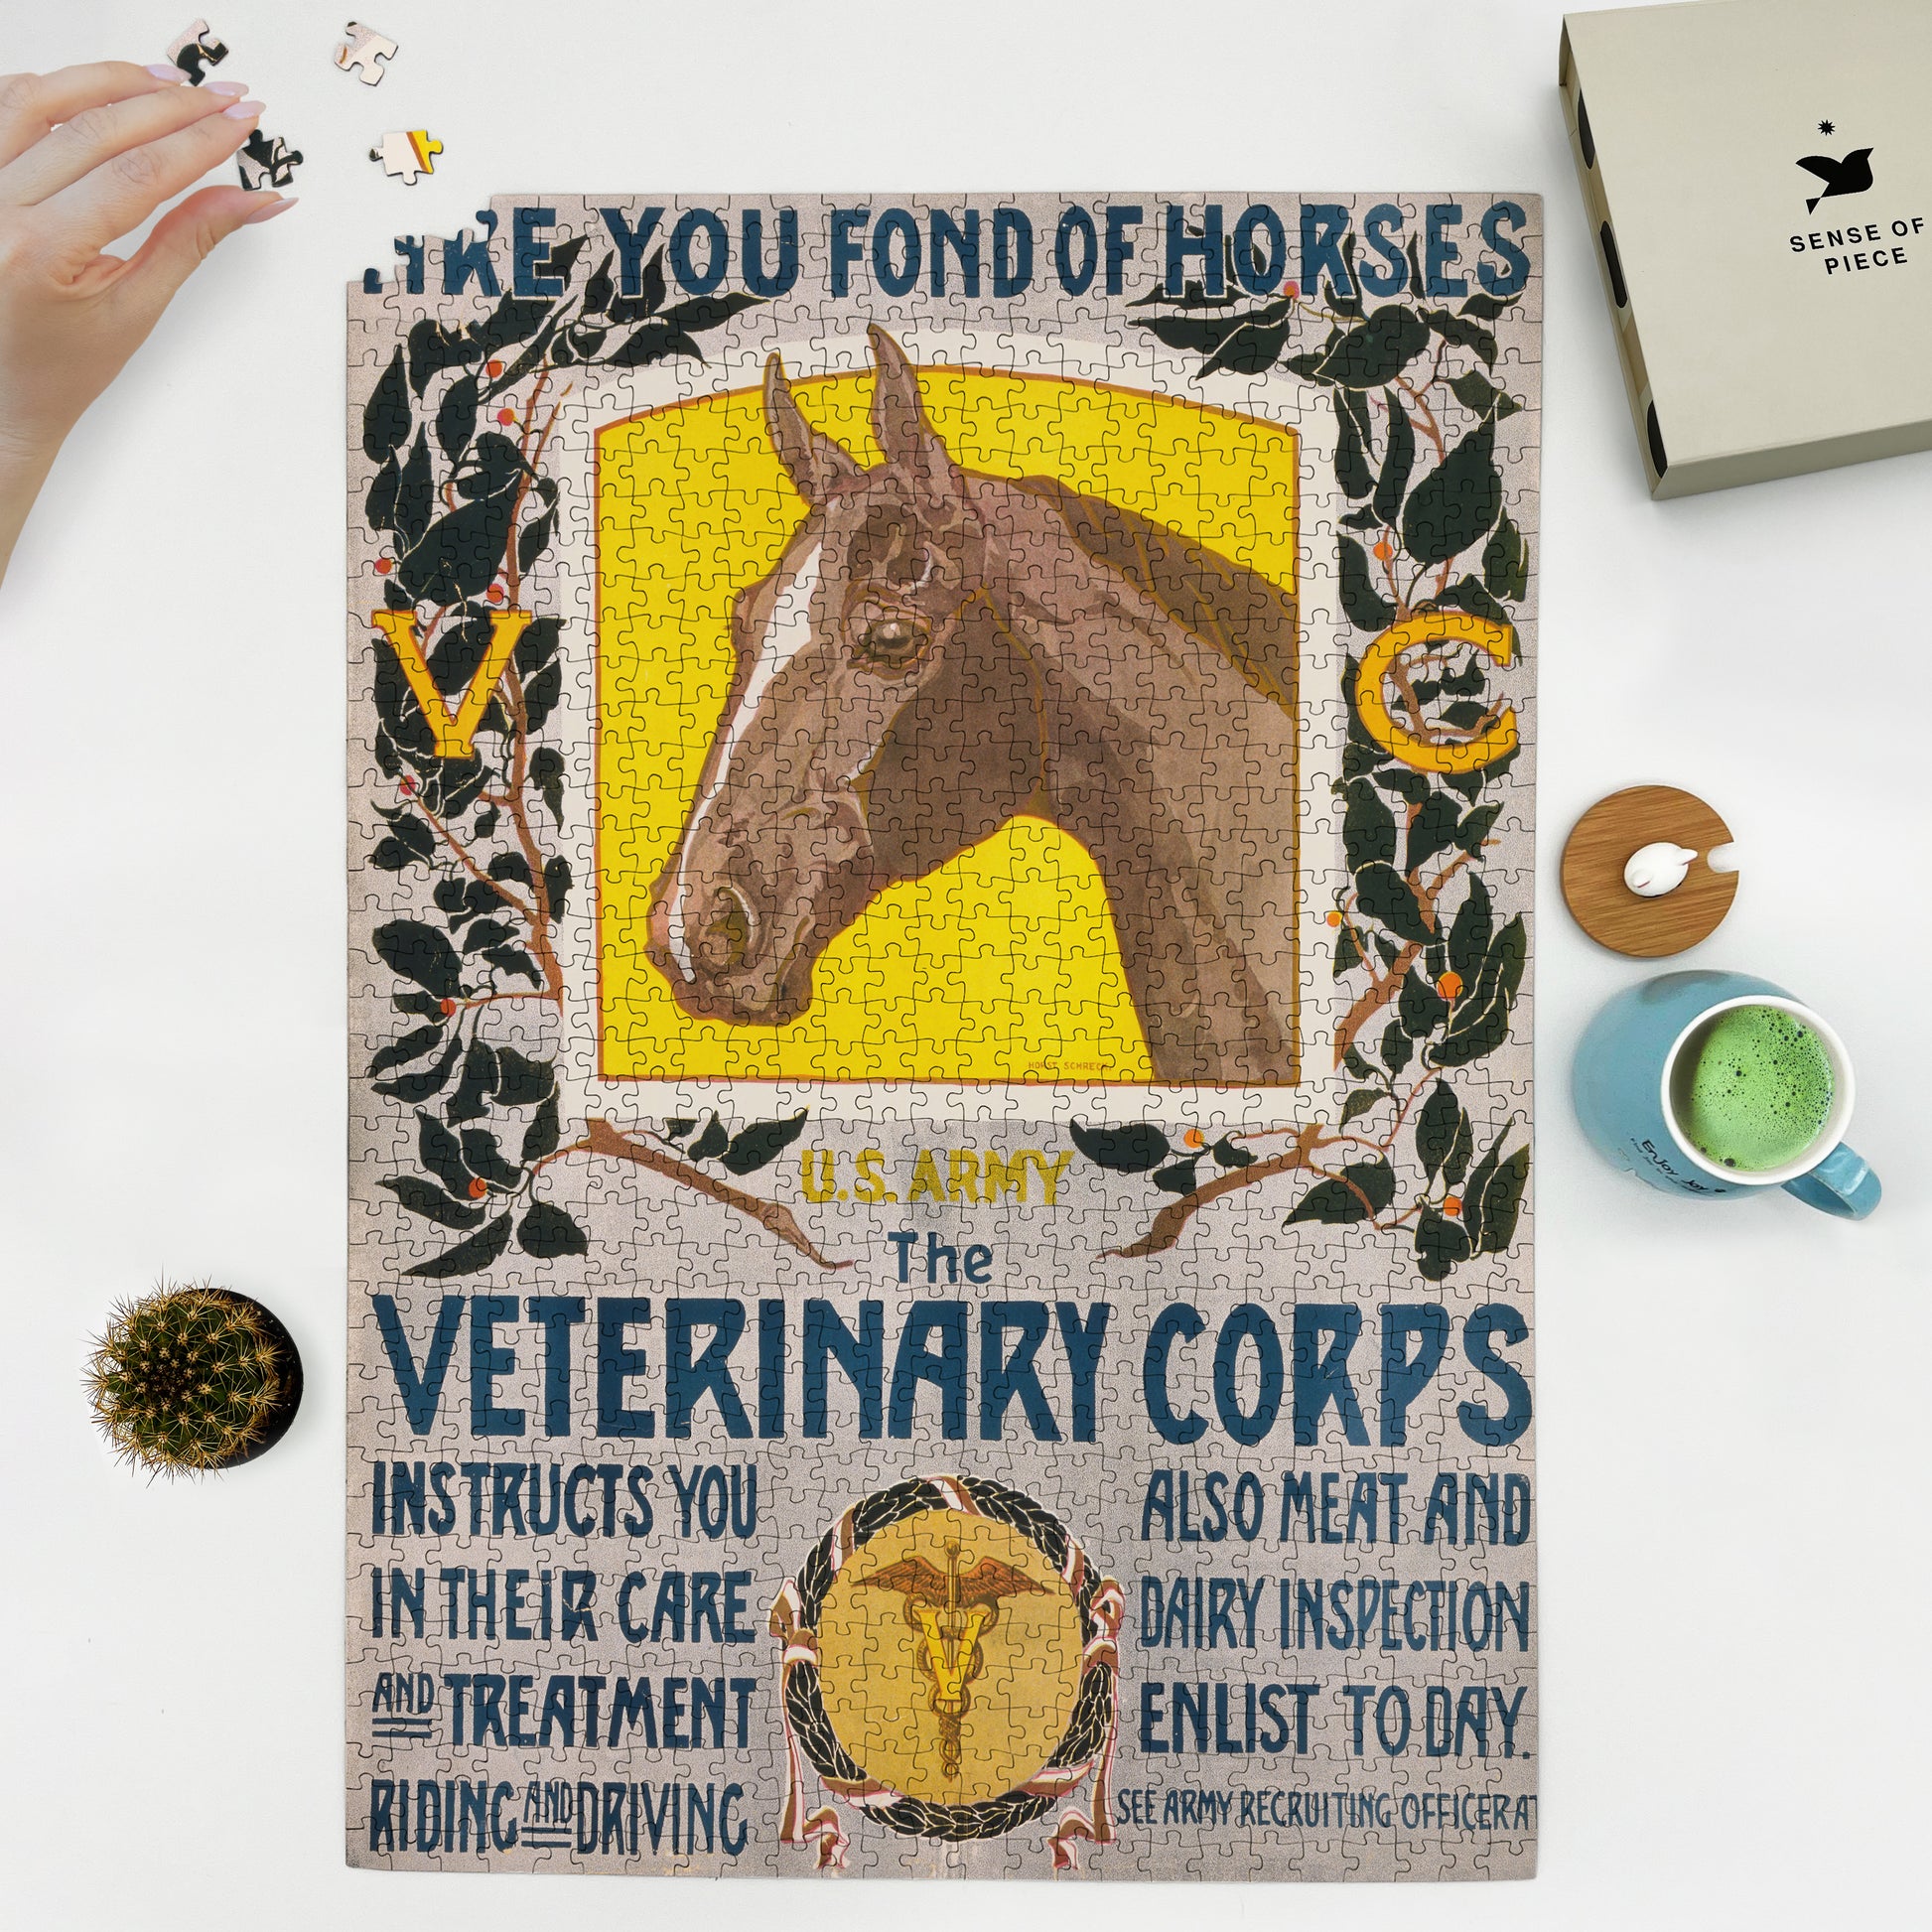 1000 piece puzzle 1919 Are you fond of horses – U S  Army – The Veterinary Corps instructs you in their care and treatment  riding and driving Horst Schreck 